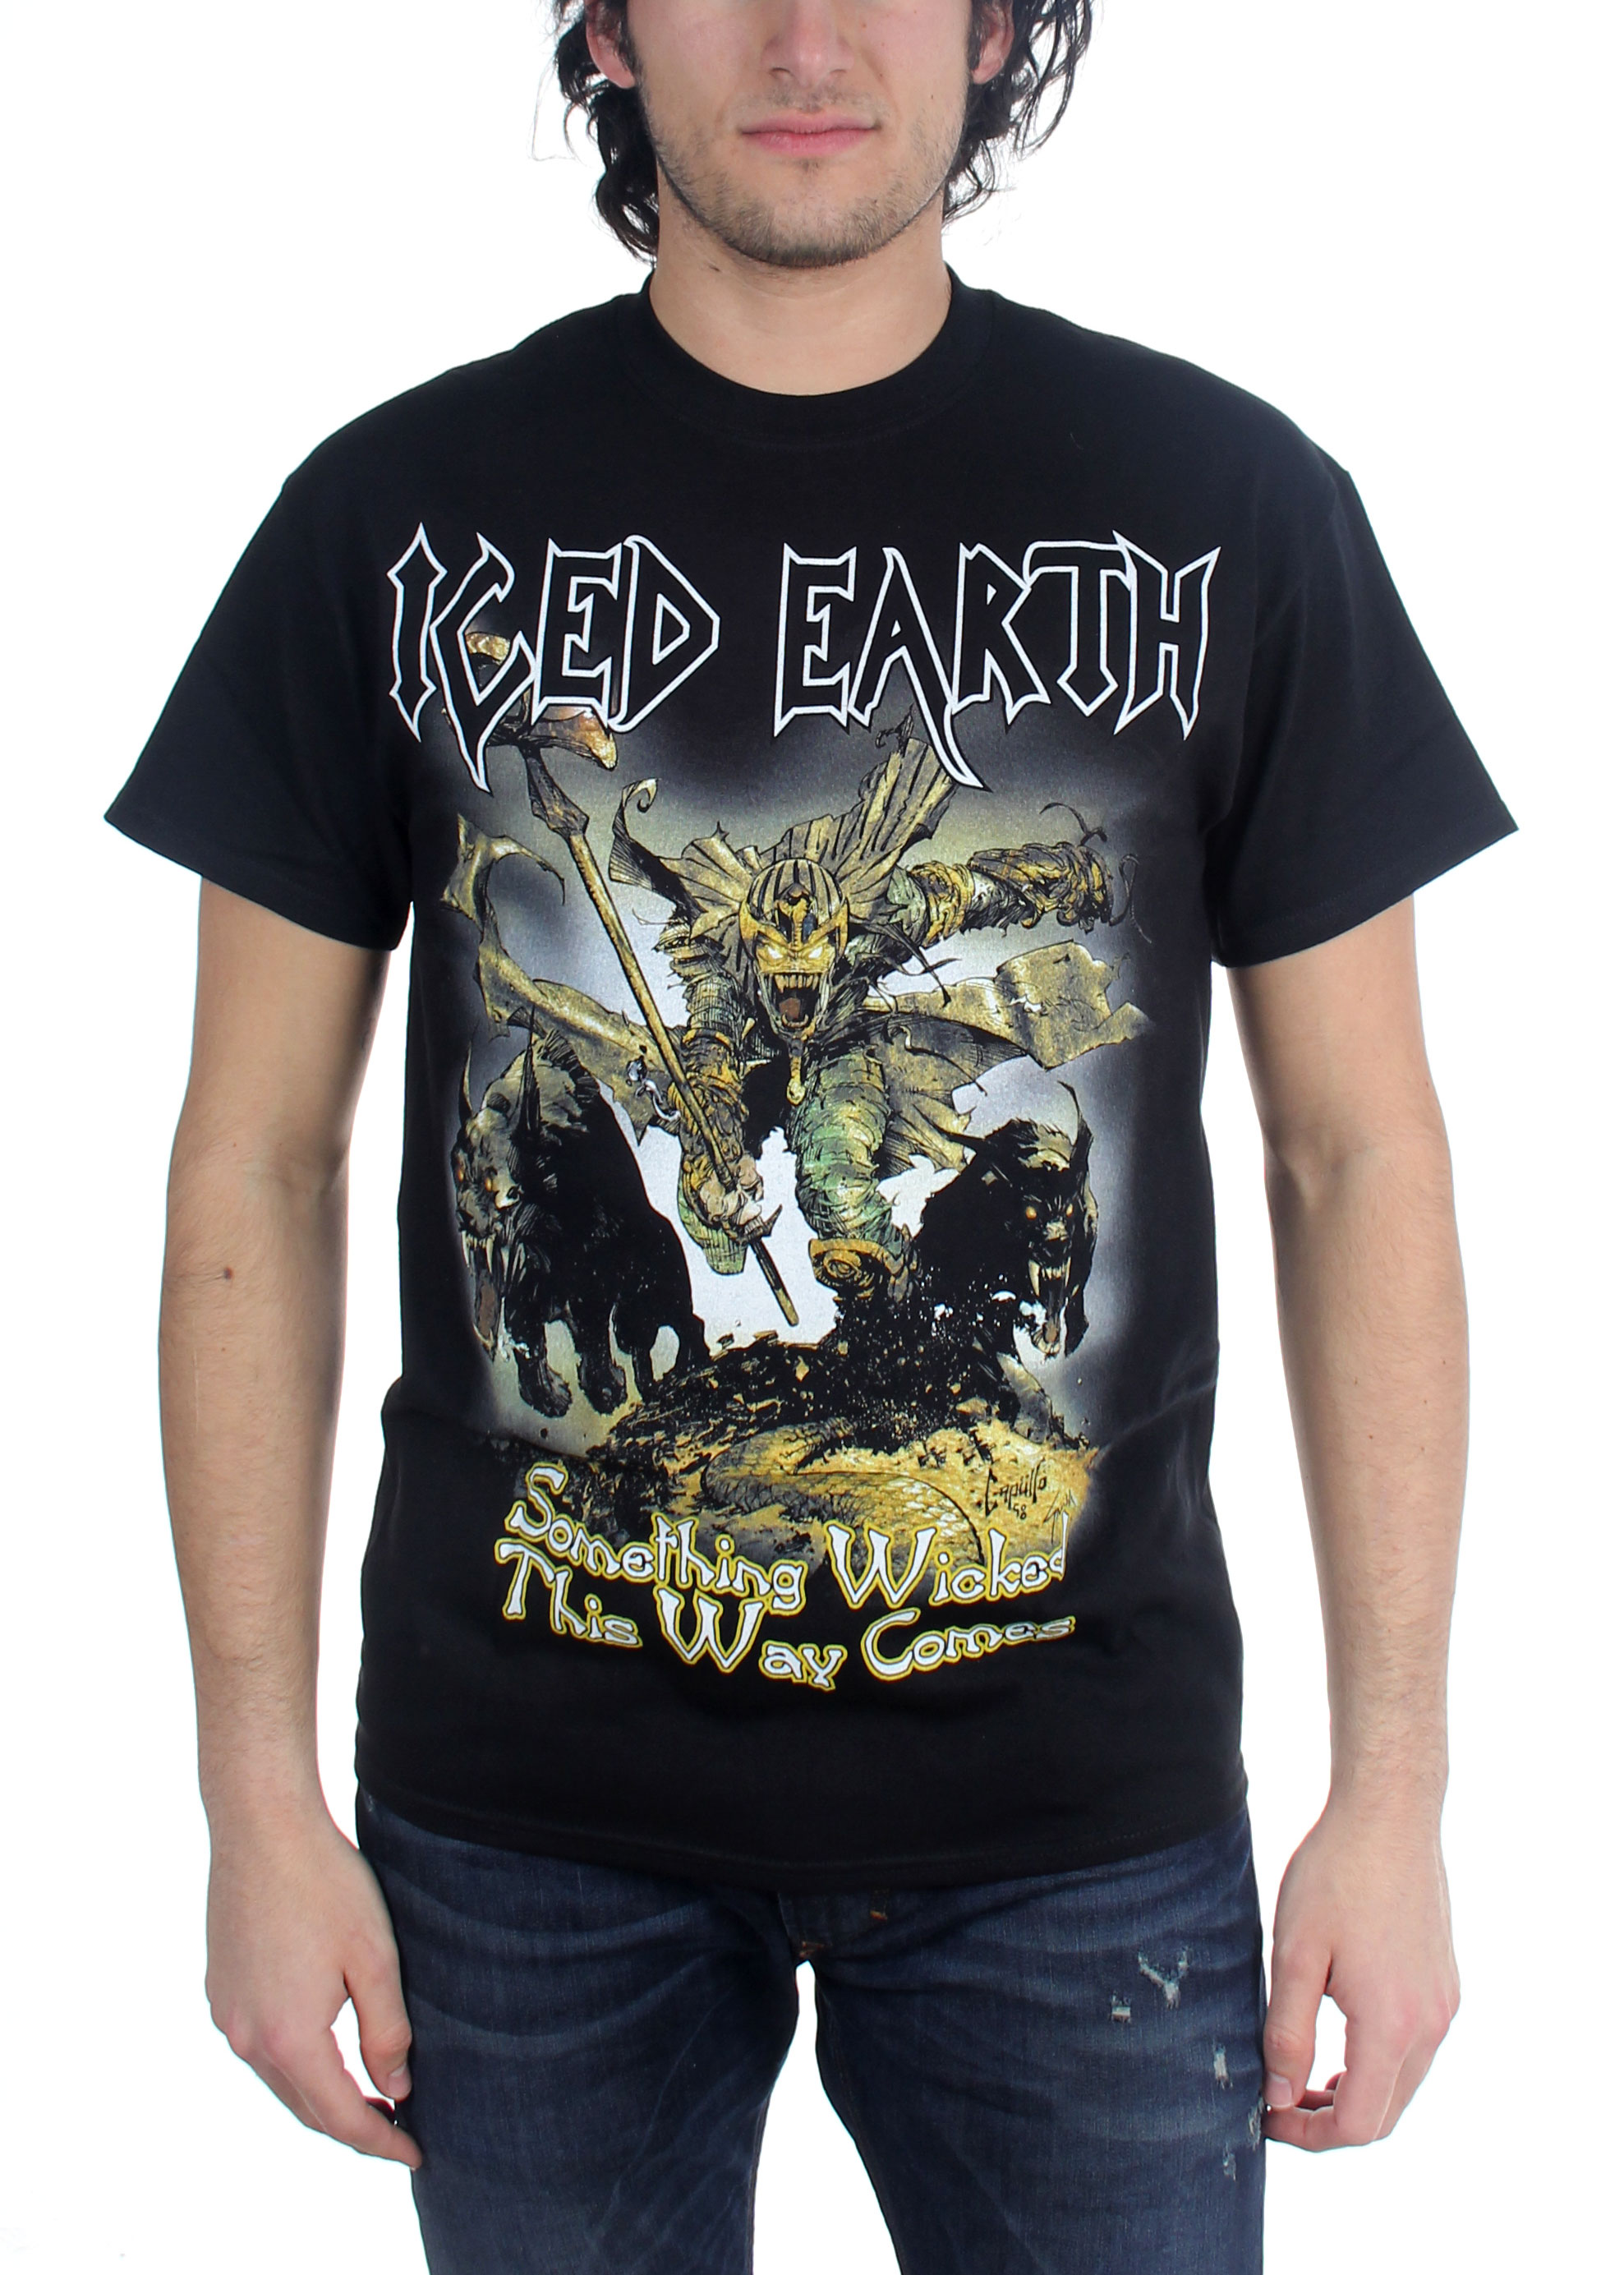 ICED EARTH-Something Wicked This Way Comes-Heavy metal,T-shirt-SIZES S to 7XL 